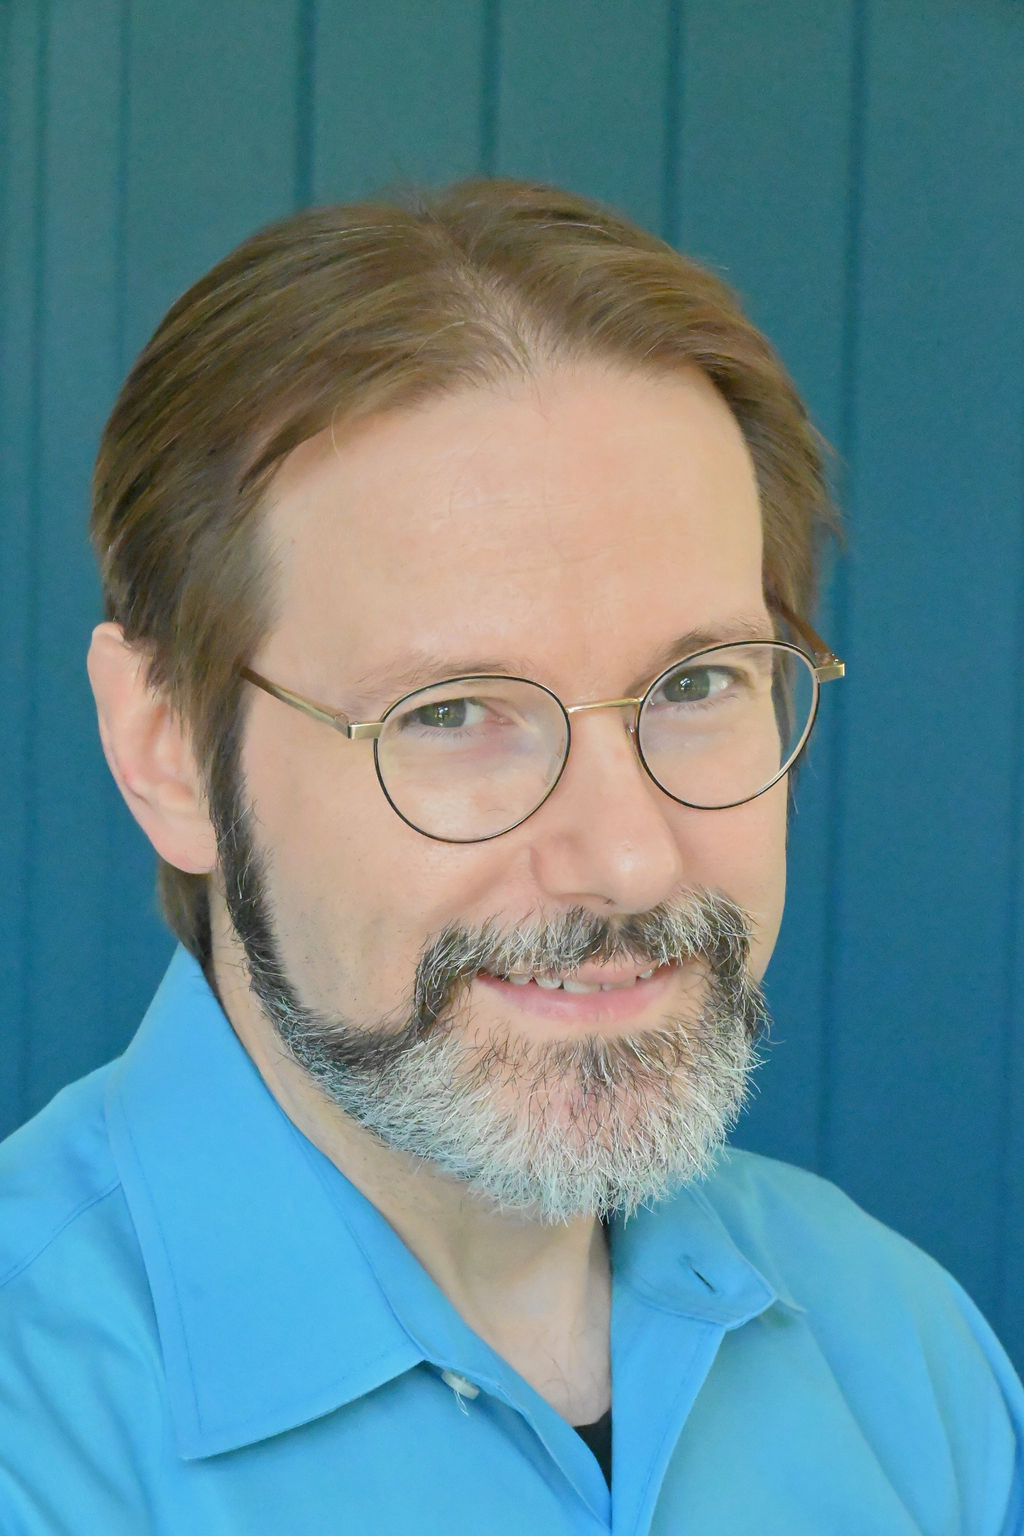 A headshot of a man wearing glasses and a blue shirt. He has brown hair and a darker mustache and beard which is greying.